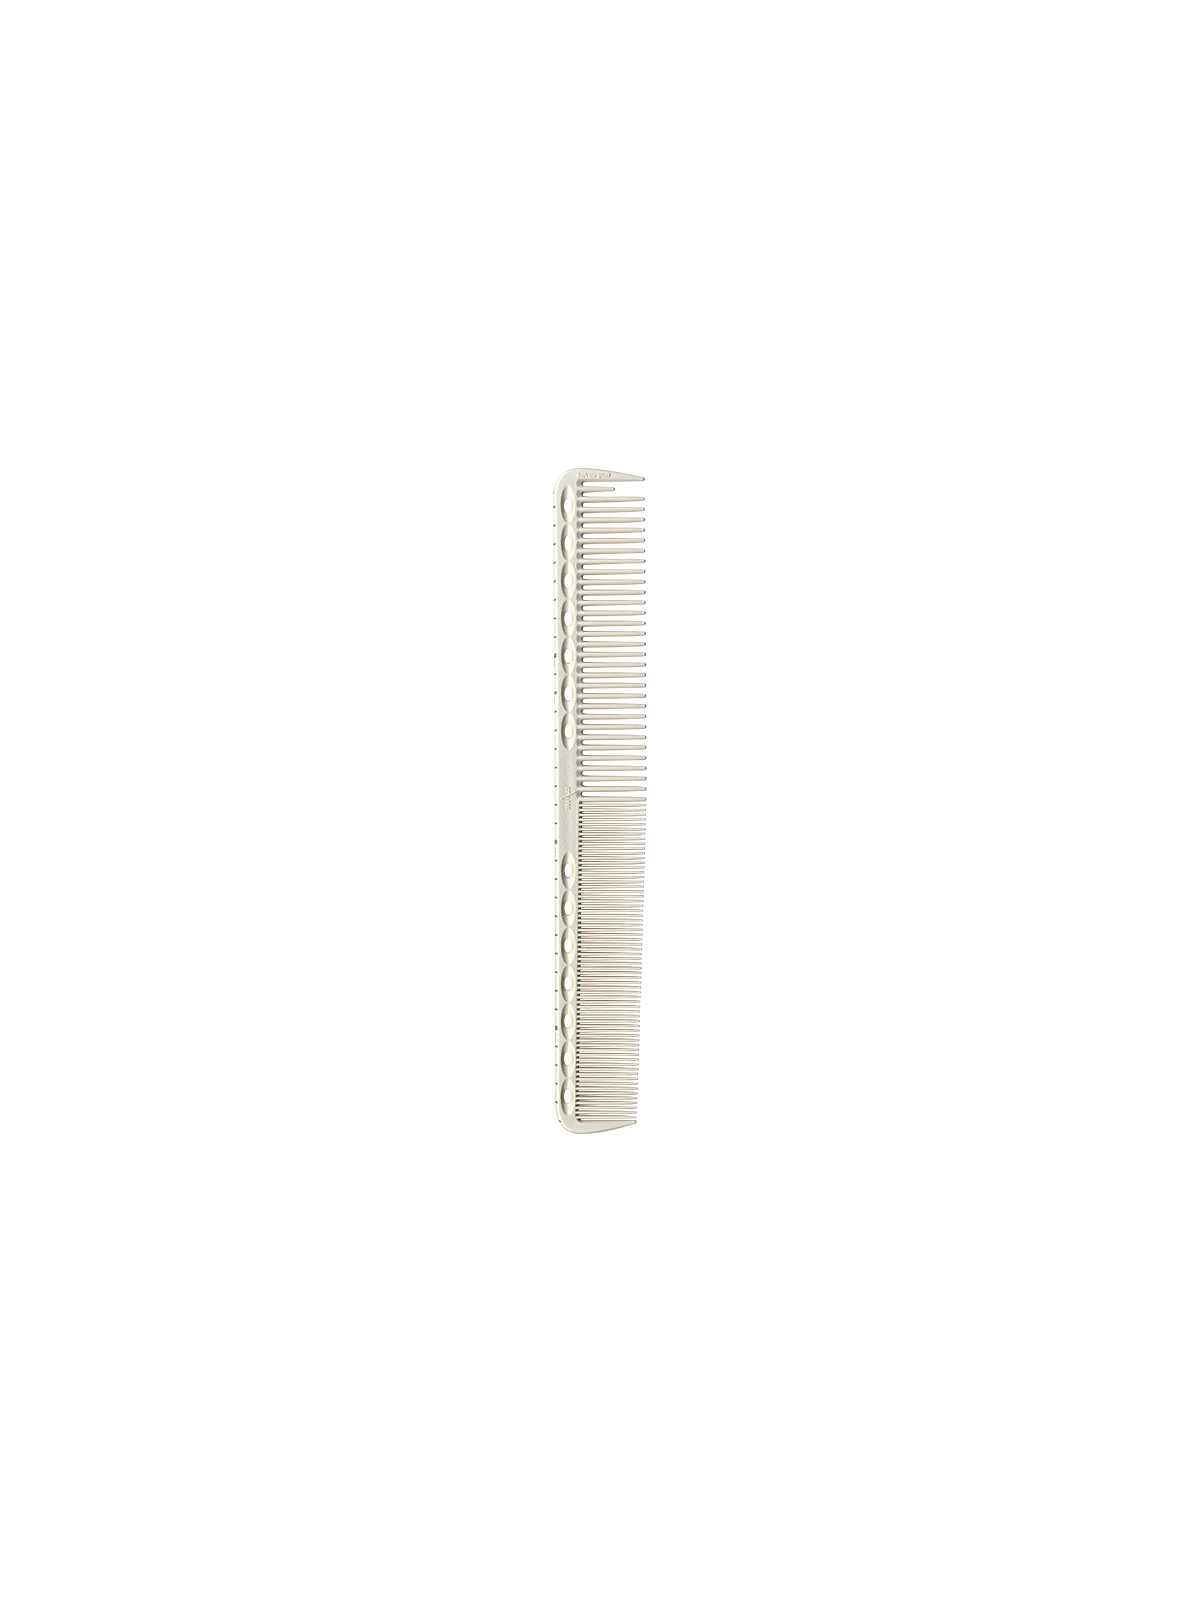 Y.S. Park G39 Cutting Comb with Guide 180mm